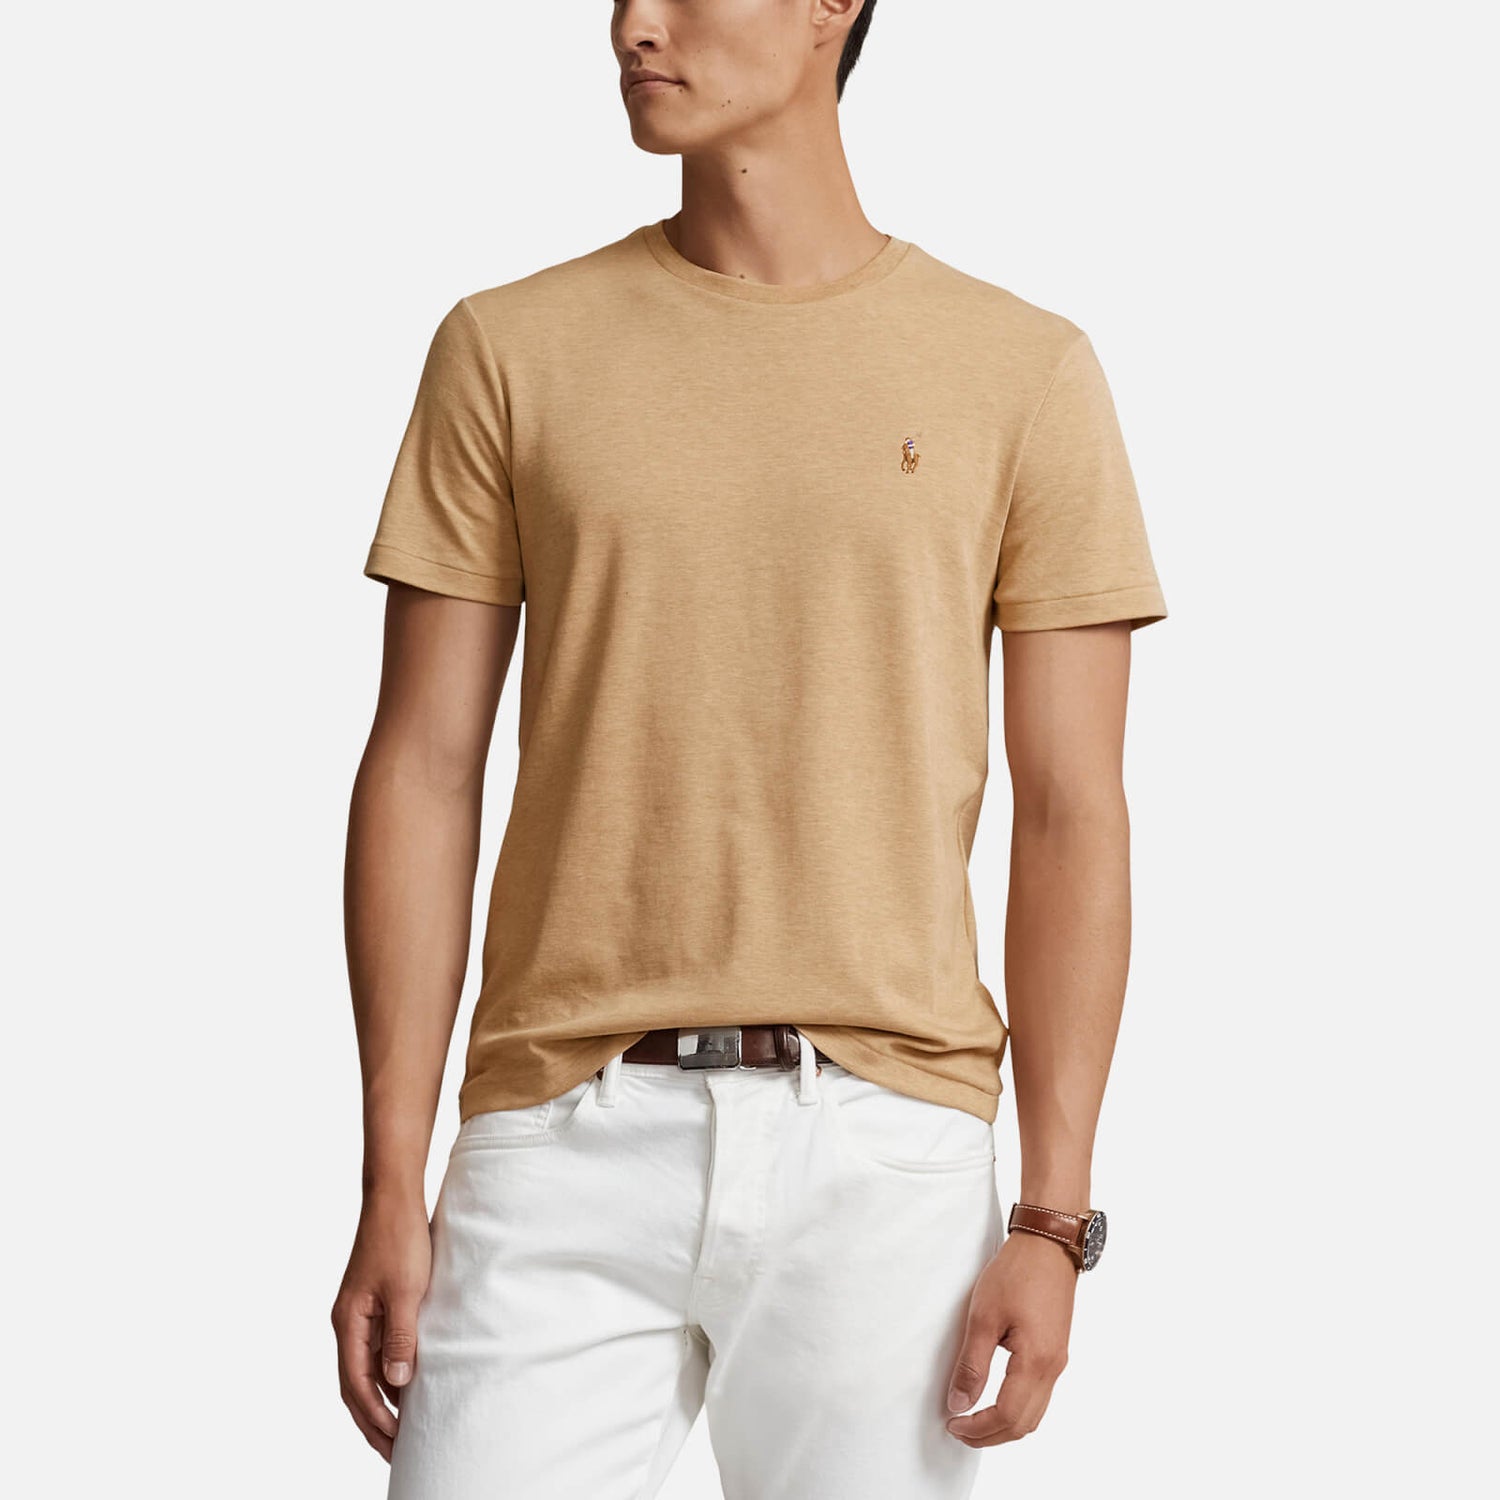 Polo Ralph Lauren Weiches Custom-Slim-Fit T-Shirt - Classic Camel Heather - S